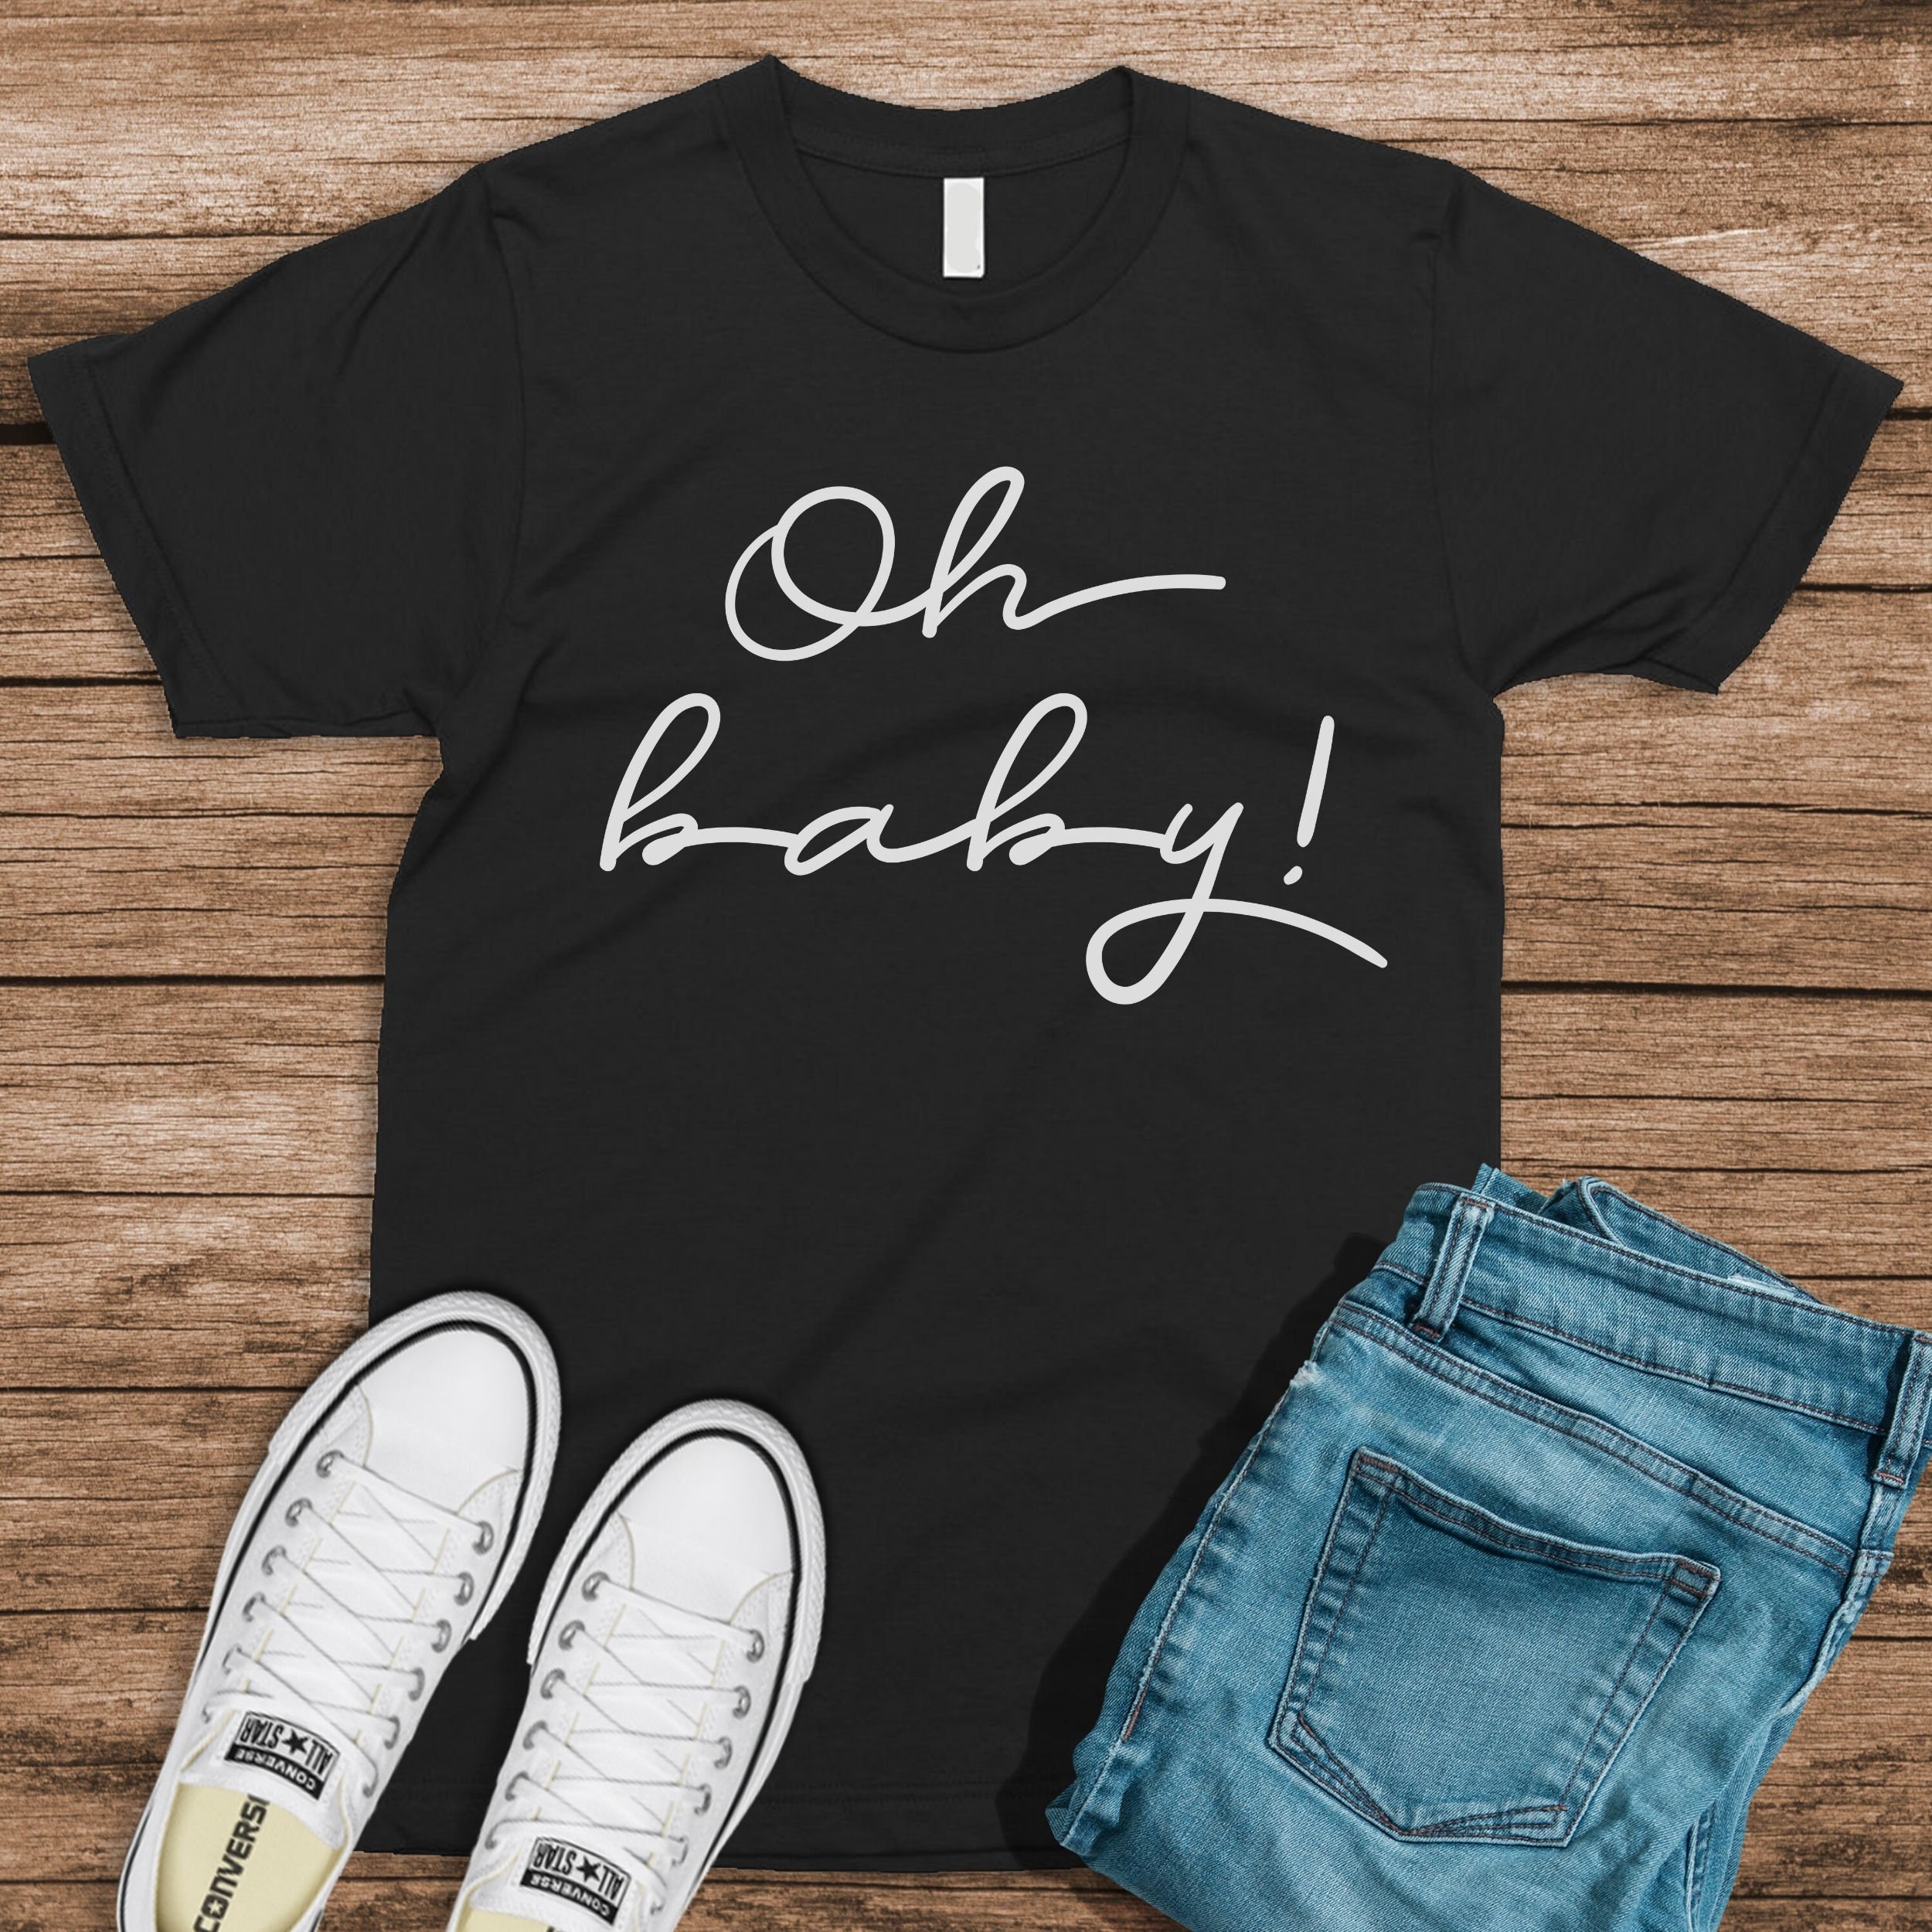 Coming Soon Pregnancy Reveal Baby Announcement Pregnant Shirt Mom To Be Gift For Her Shirts With Sayings, Oh Baby Surprize